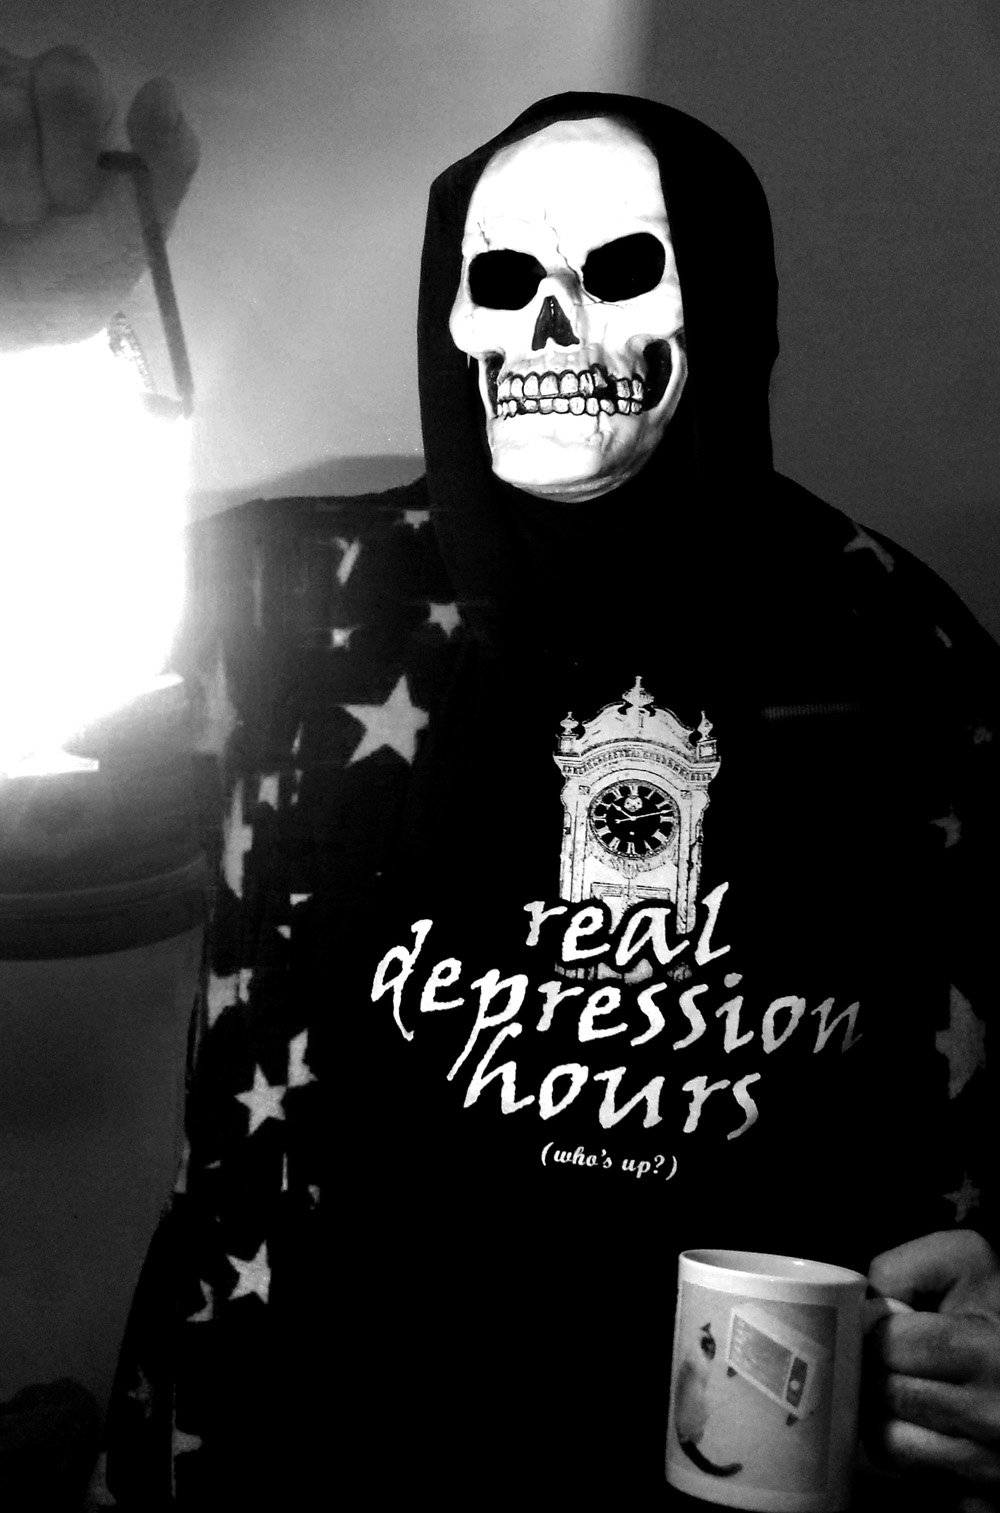 Image of Real Depression Hours (Who's up?) shirt